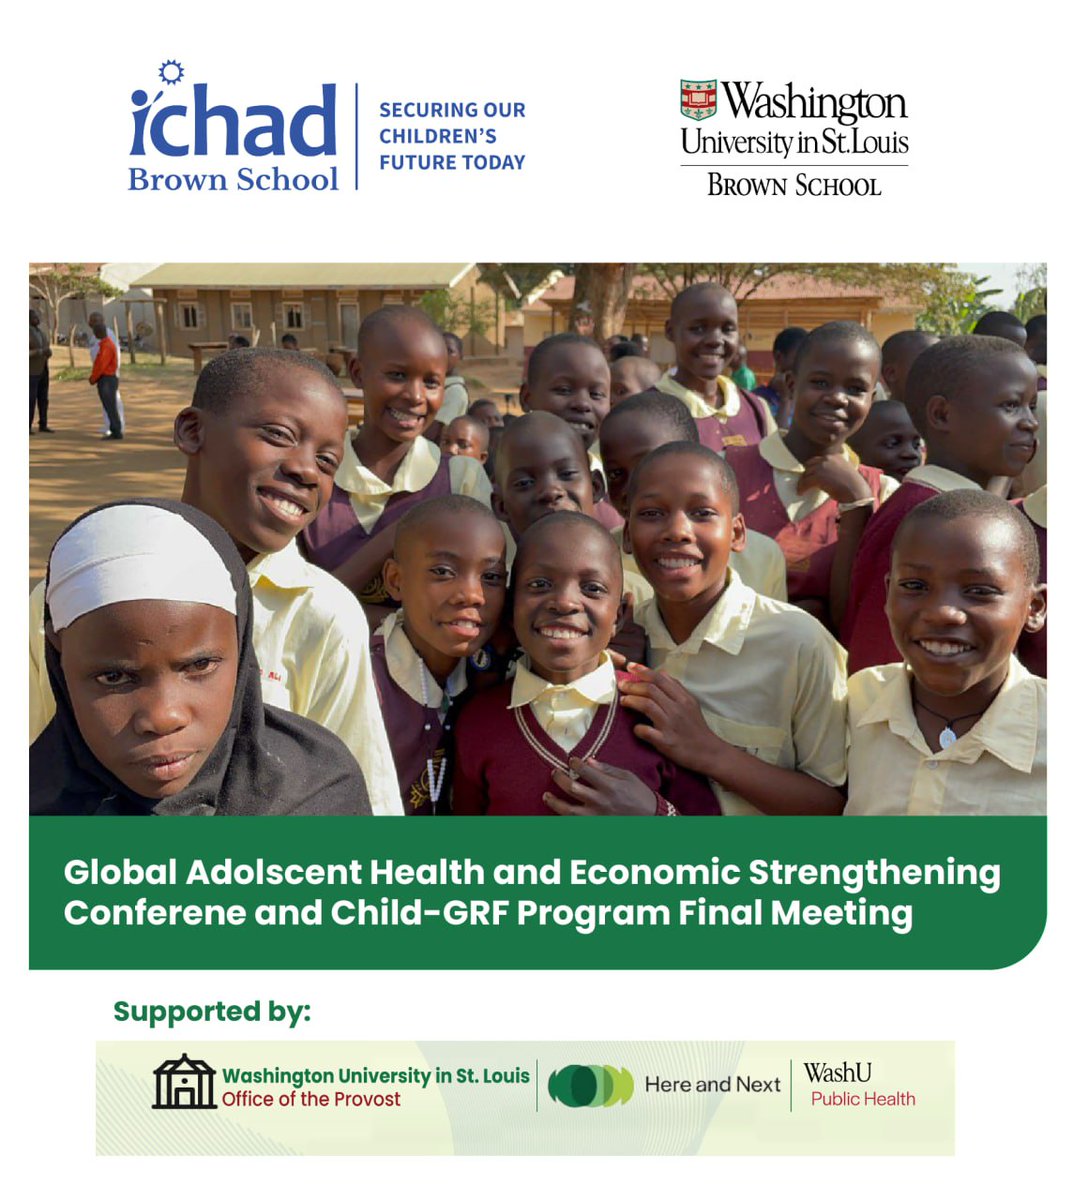 We are 3 days to the Global Adolescent Health and Economic Strengthening Conference and CHILD-GRF Final Meeting. Join several participants from around the world who will be presenting their work on child health and poverty reduction interventions in under-resourced communities.